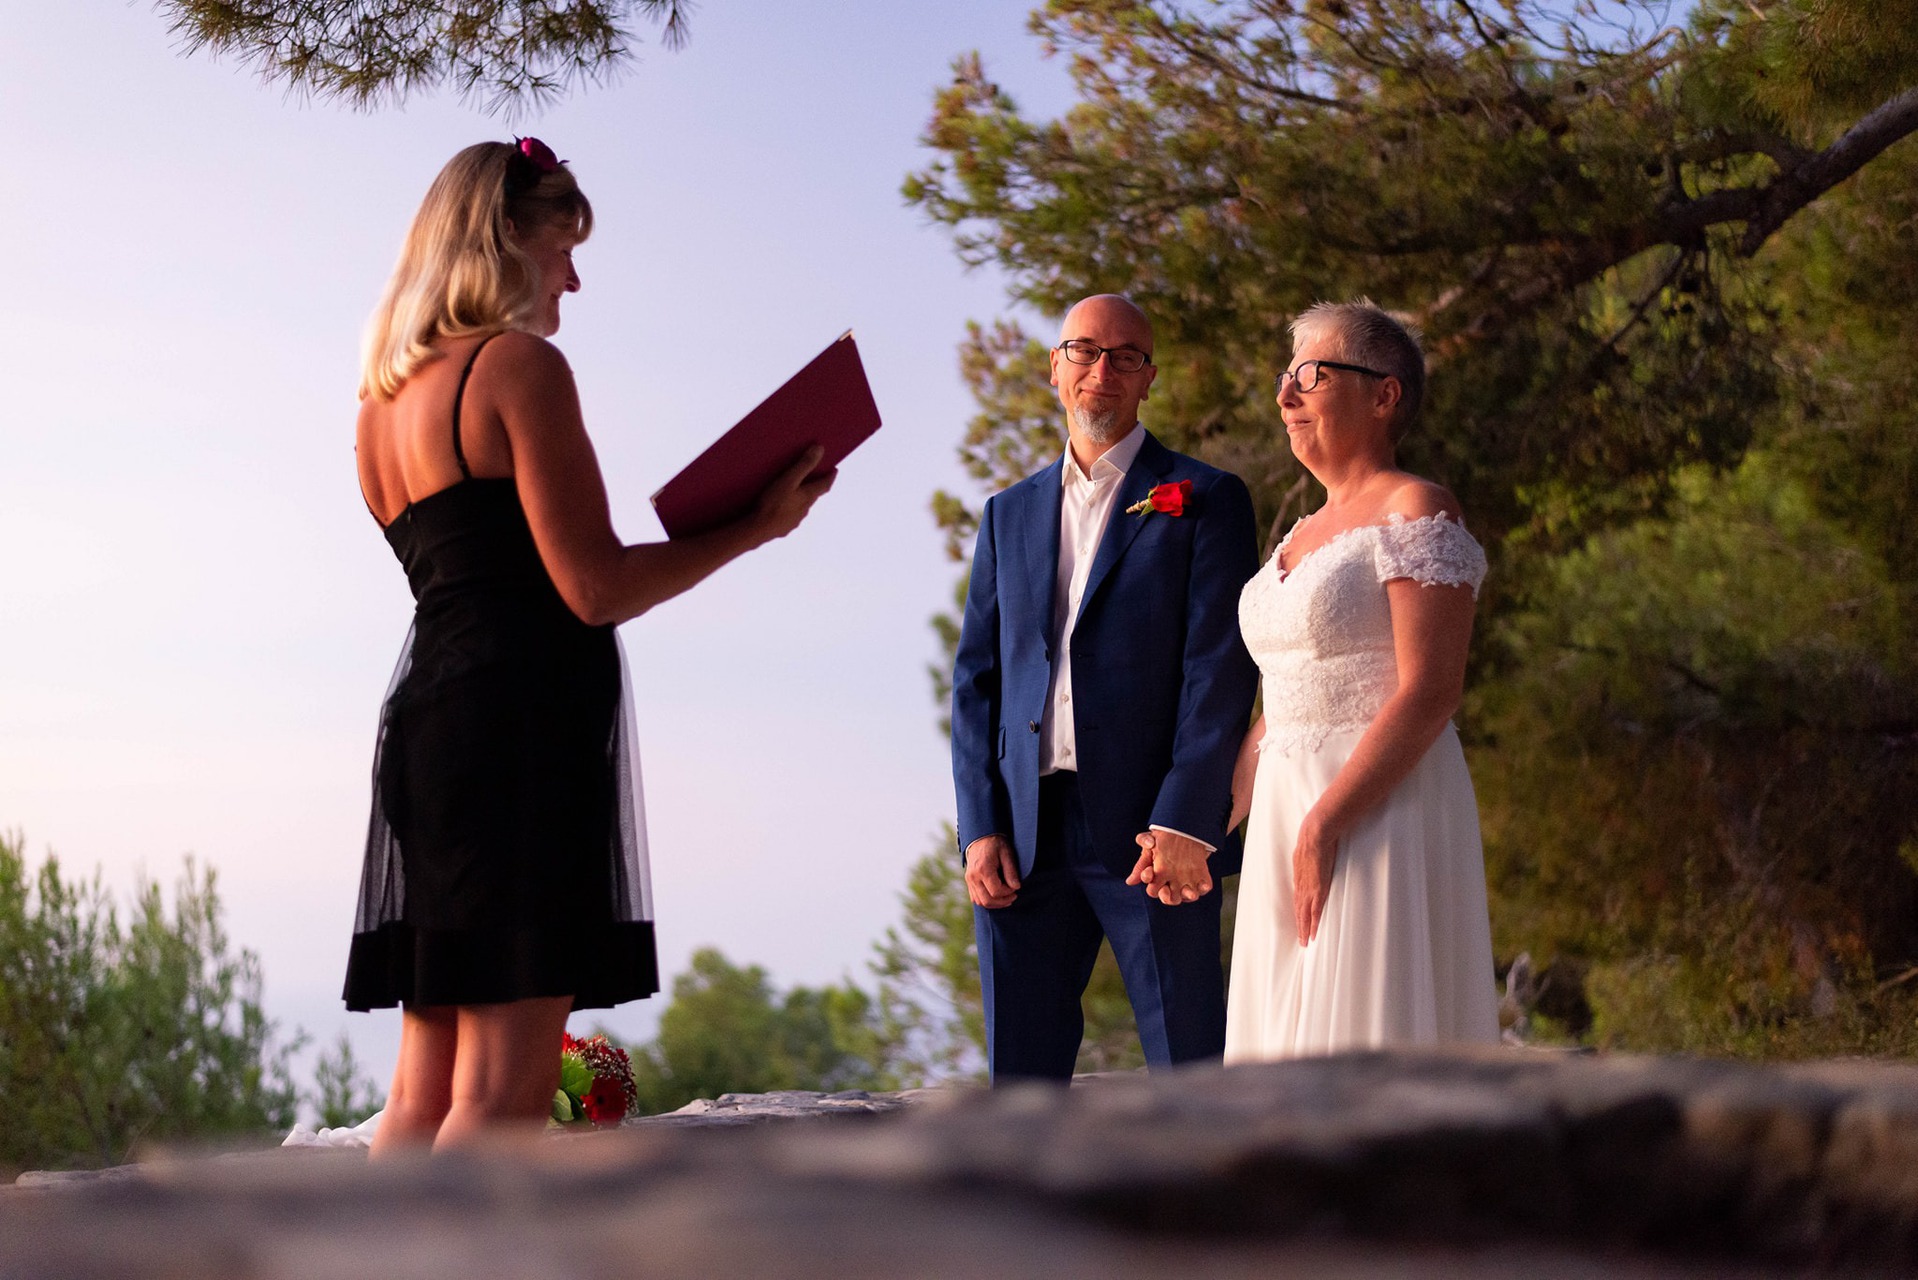 Sunrise vow renewal with Celebrant Spain